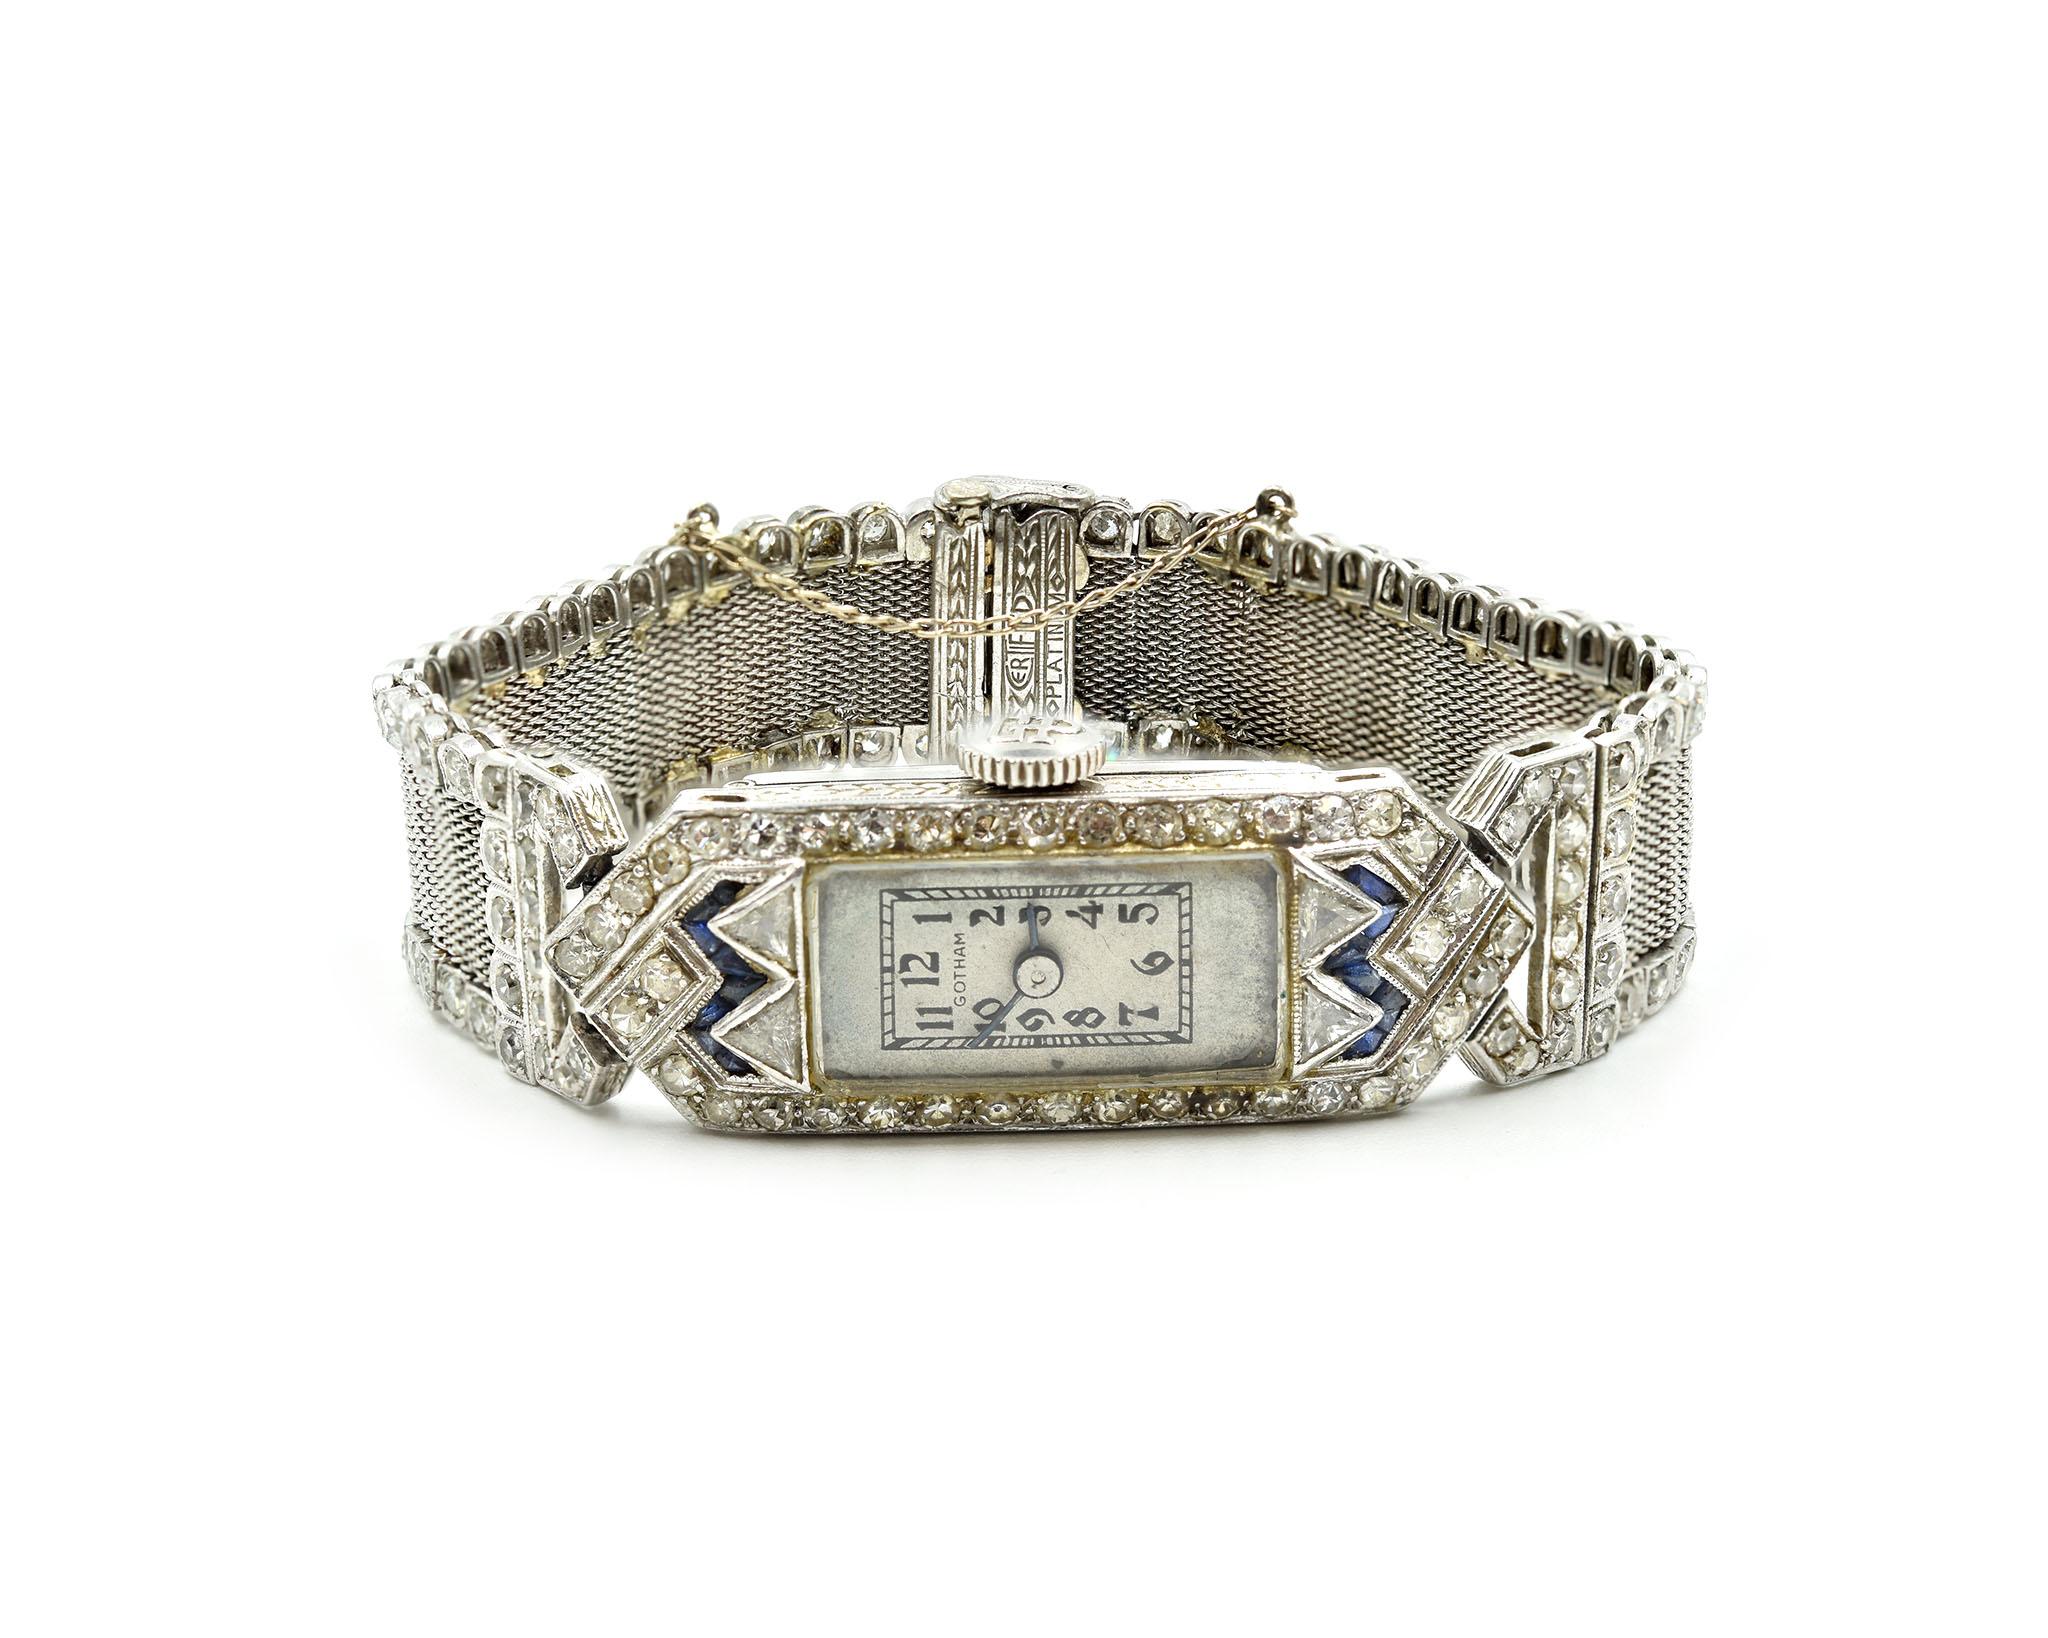 Movement: mechanical 17 jewel movement
Function: hours, minutes
Case: rectangular 37.39mm x 13.36mm platinum diamond set case, domed plastic crystal, winding crown
Diamonds: 134 round brilliant cuts = 1.69 carat total weight
Dial: grey arabic